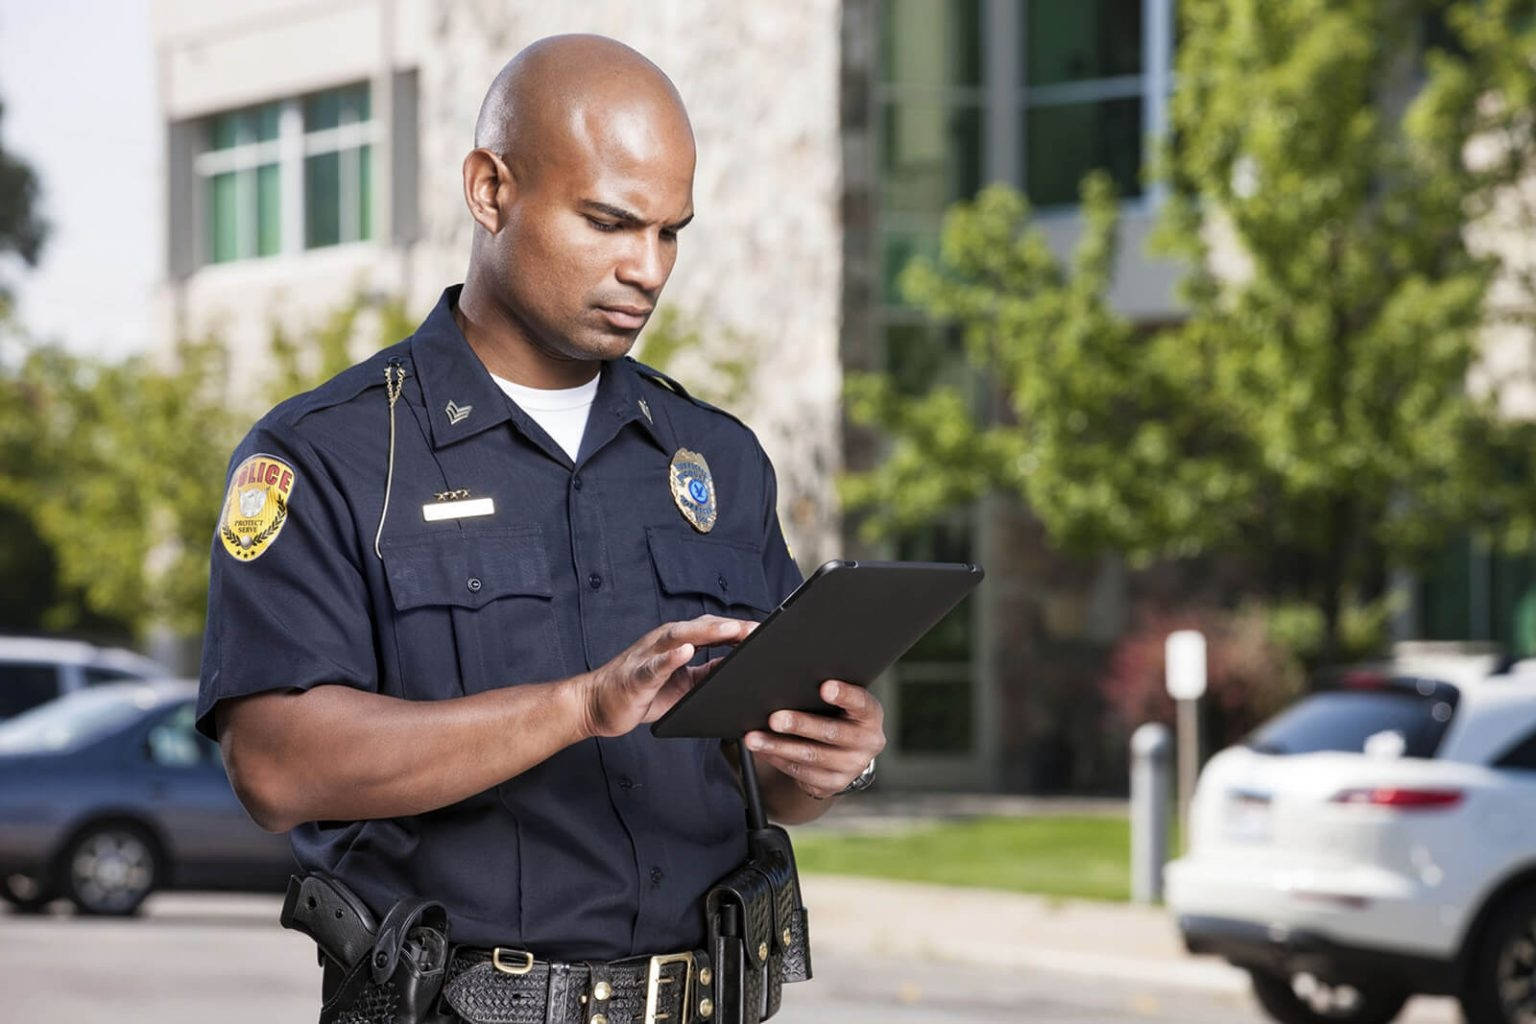 Police Officer Accessing Information on Handheld Device in the Field Wallpaper